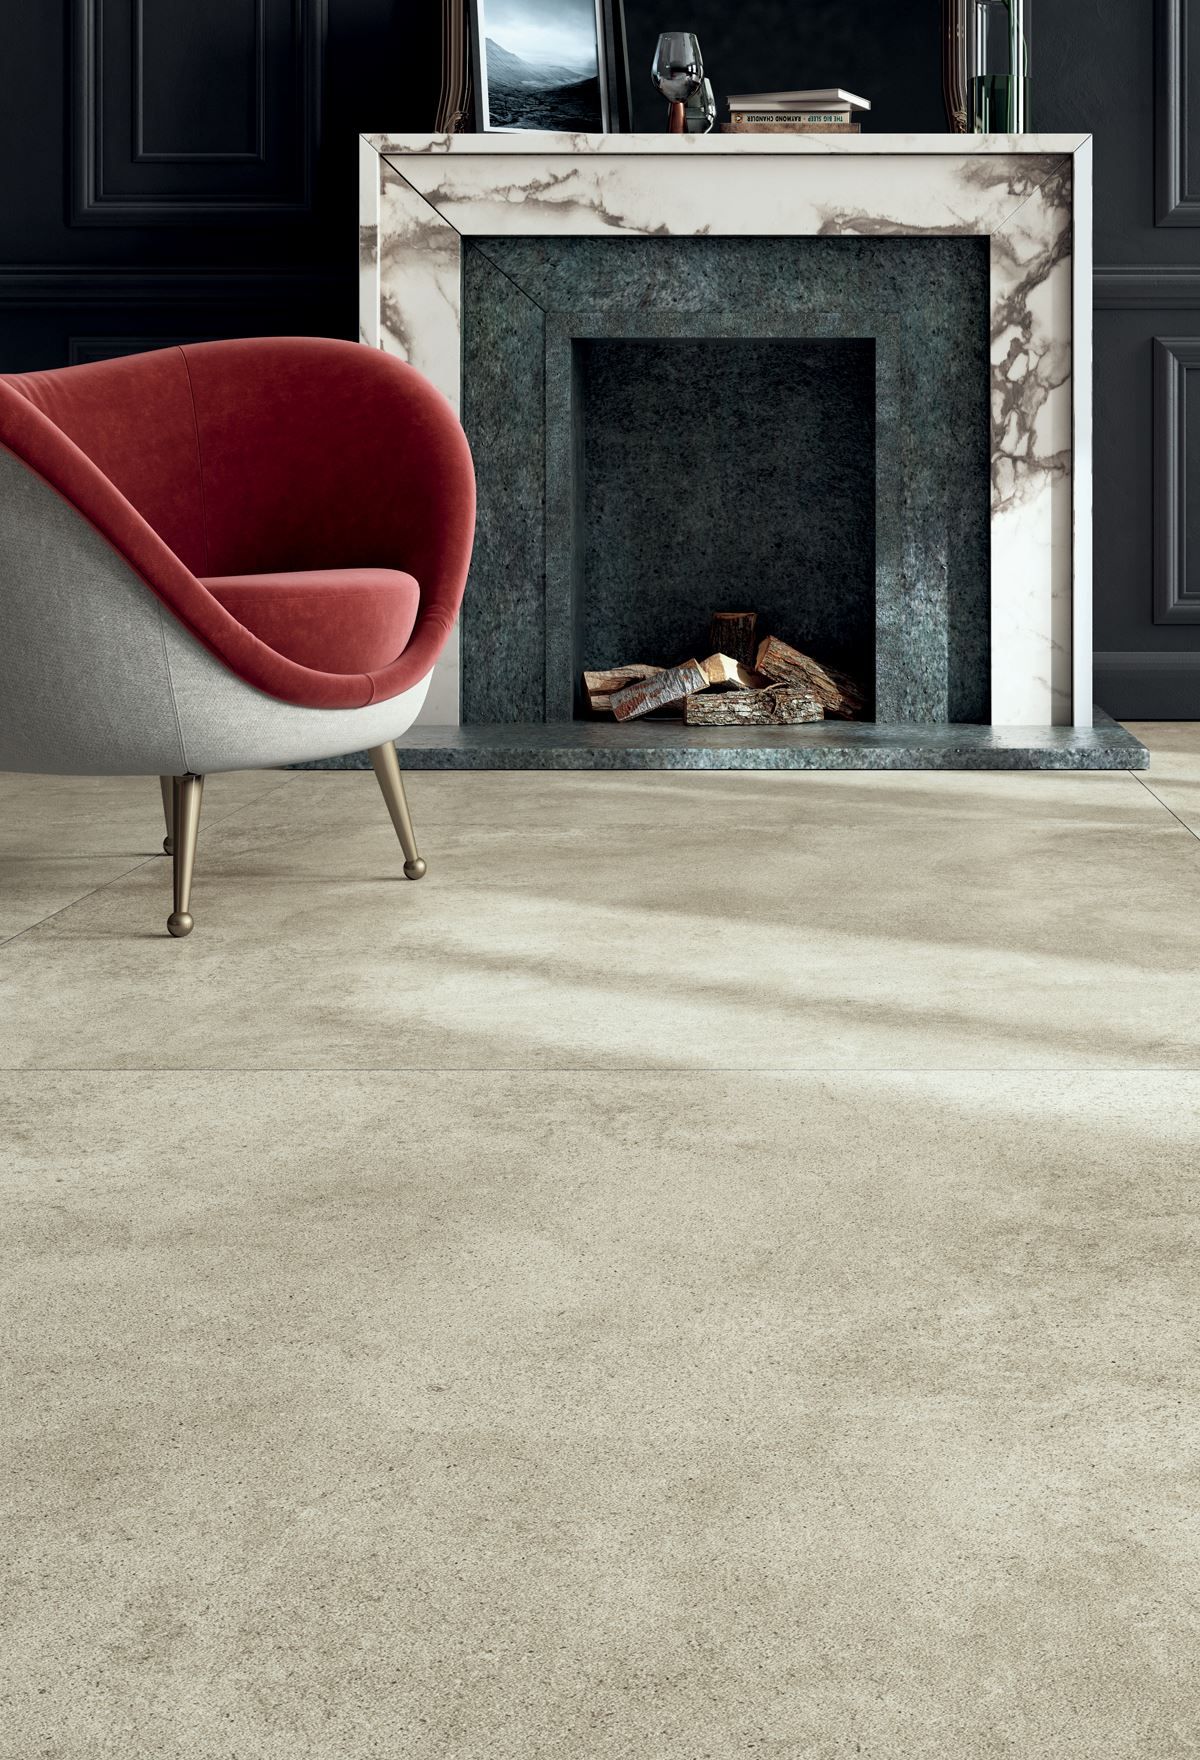 GRUNGE TAUPE Naturale wall 60x120